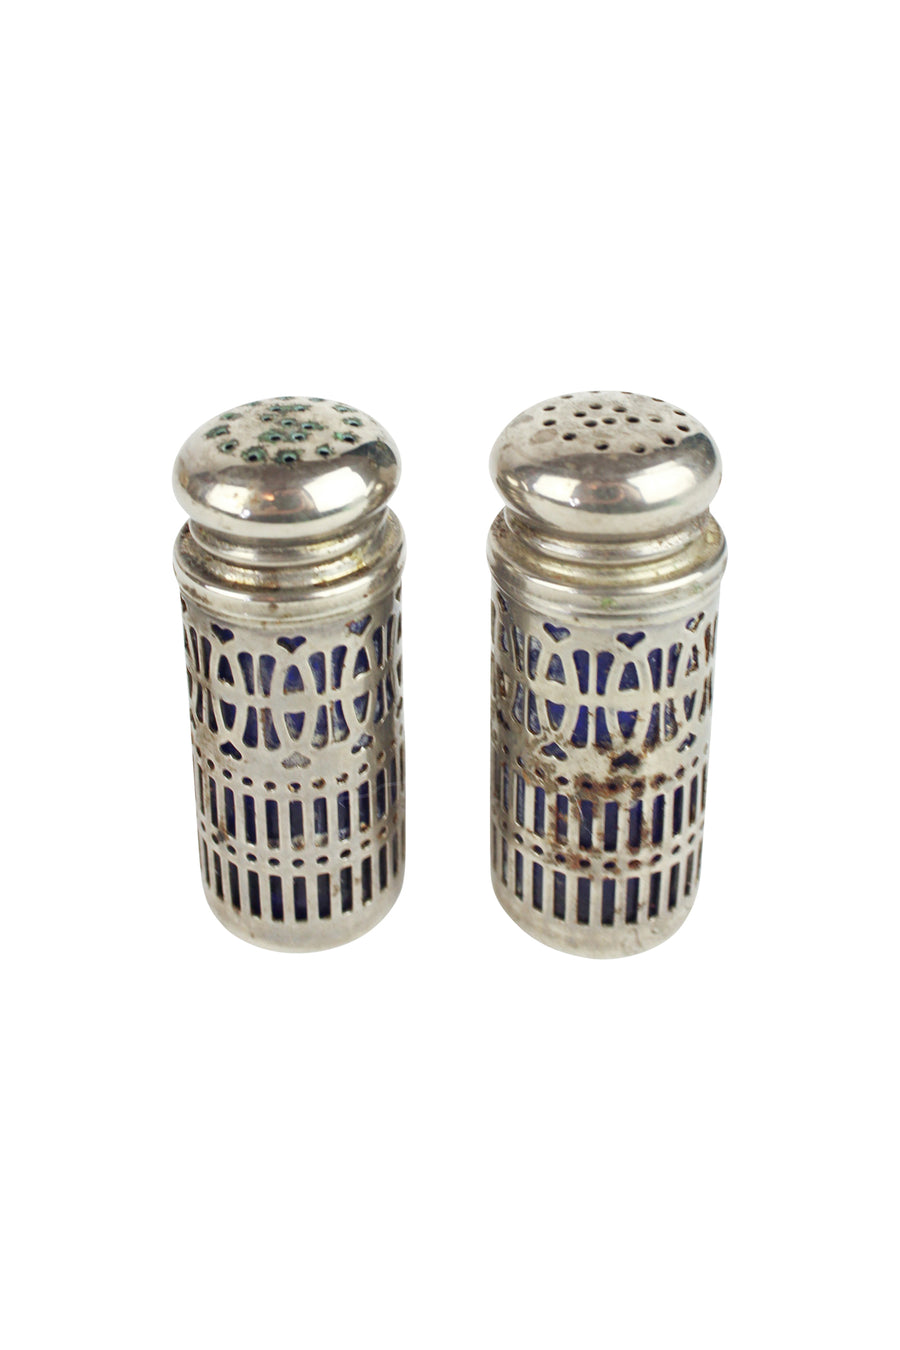 Silver Shakers